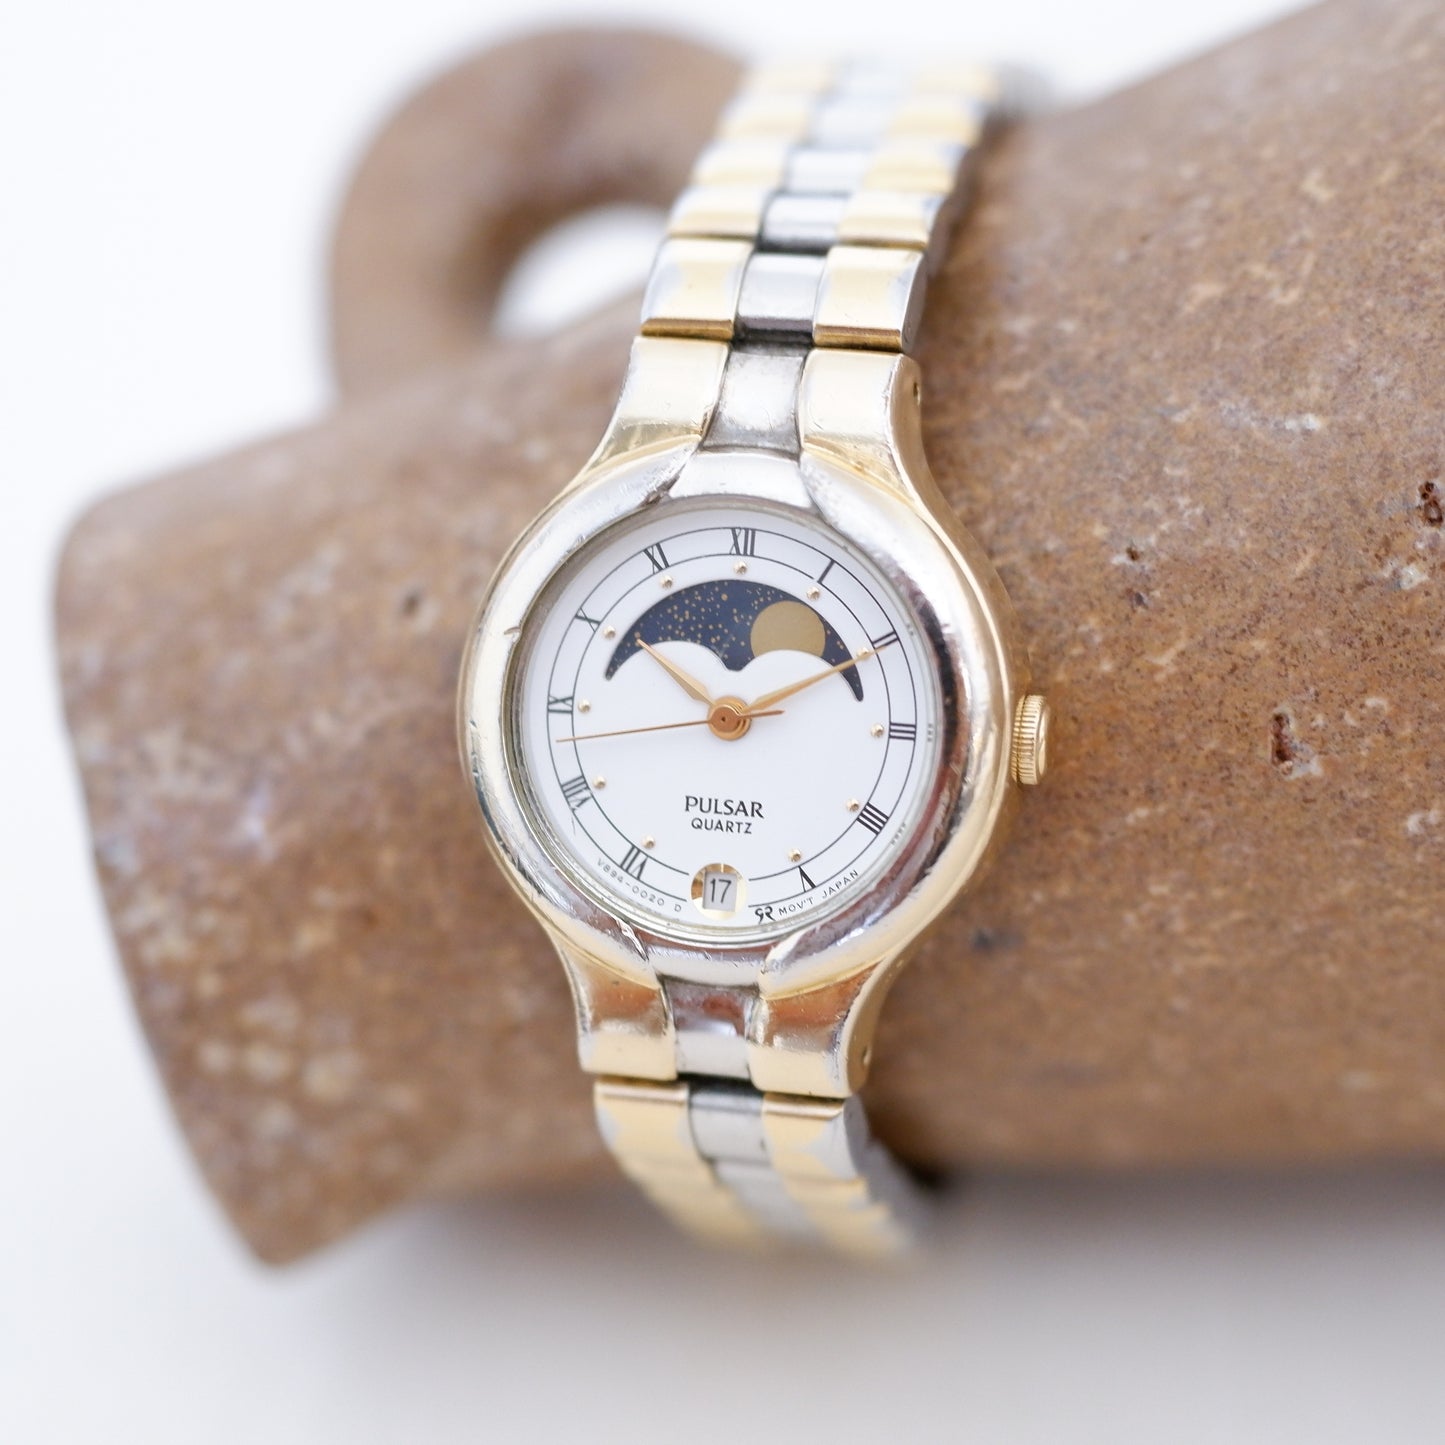 Pulsar Vintage Watch: Ladies 80s Gold Roman Numerals Moon Phase Style